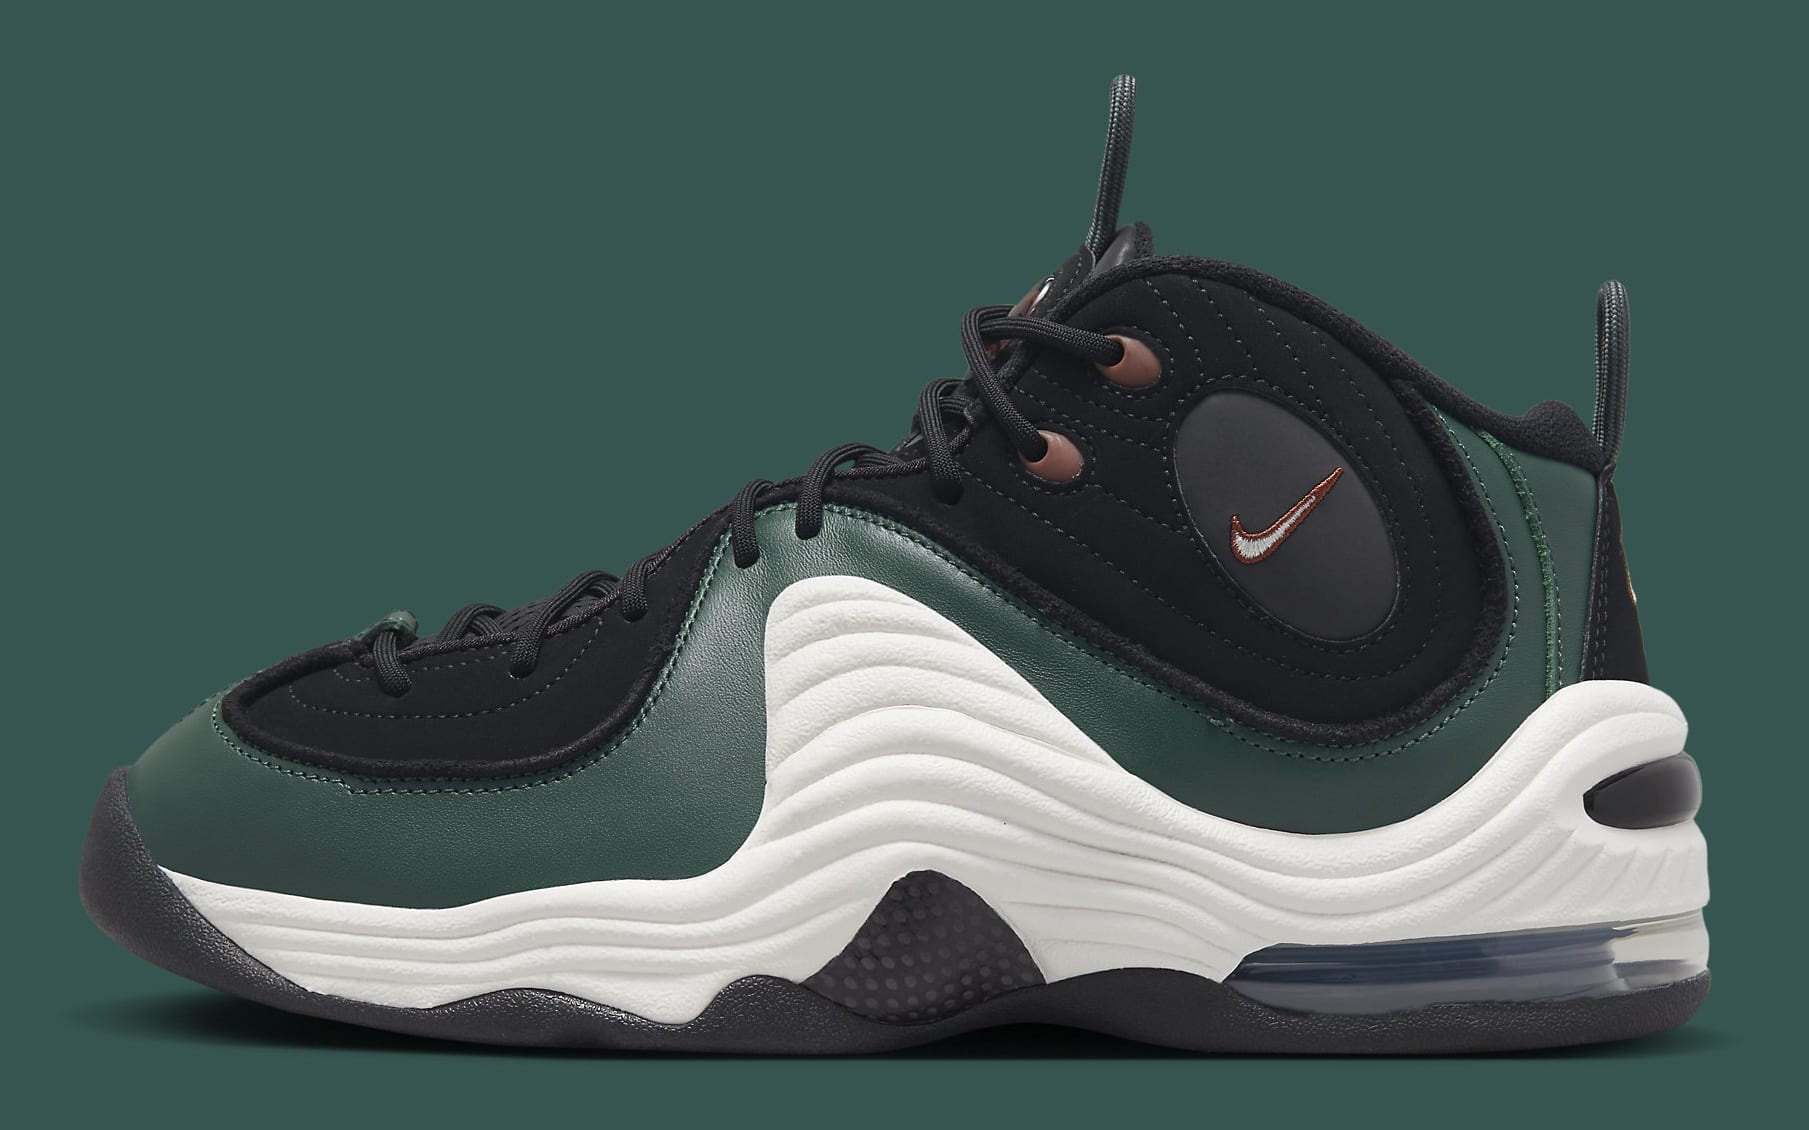 Nike Air Penny 2 Faded Spruce Release Date DV3465-001 Profile